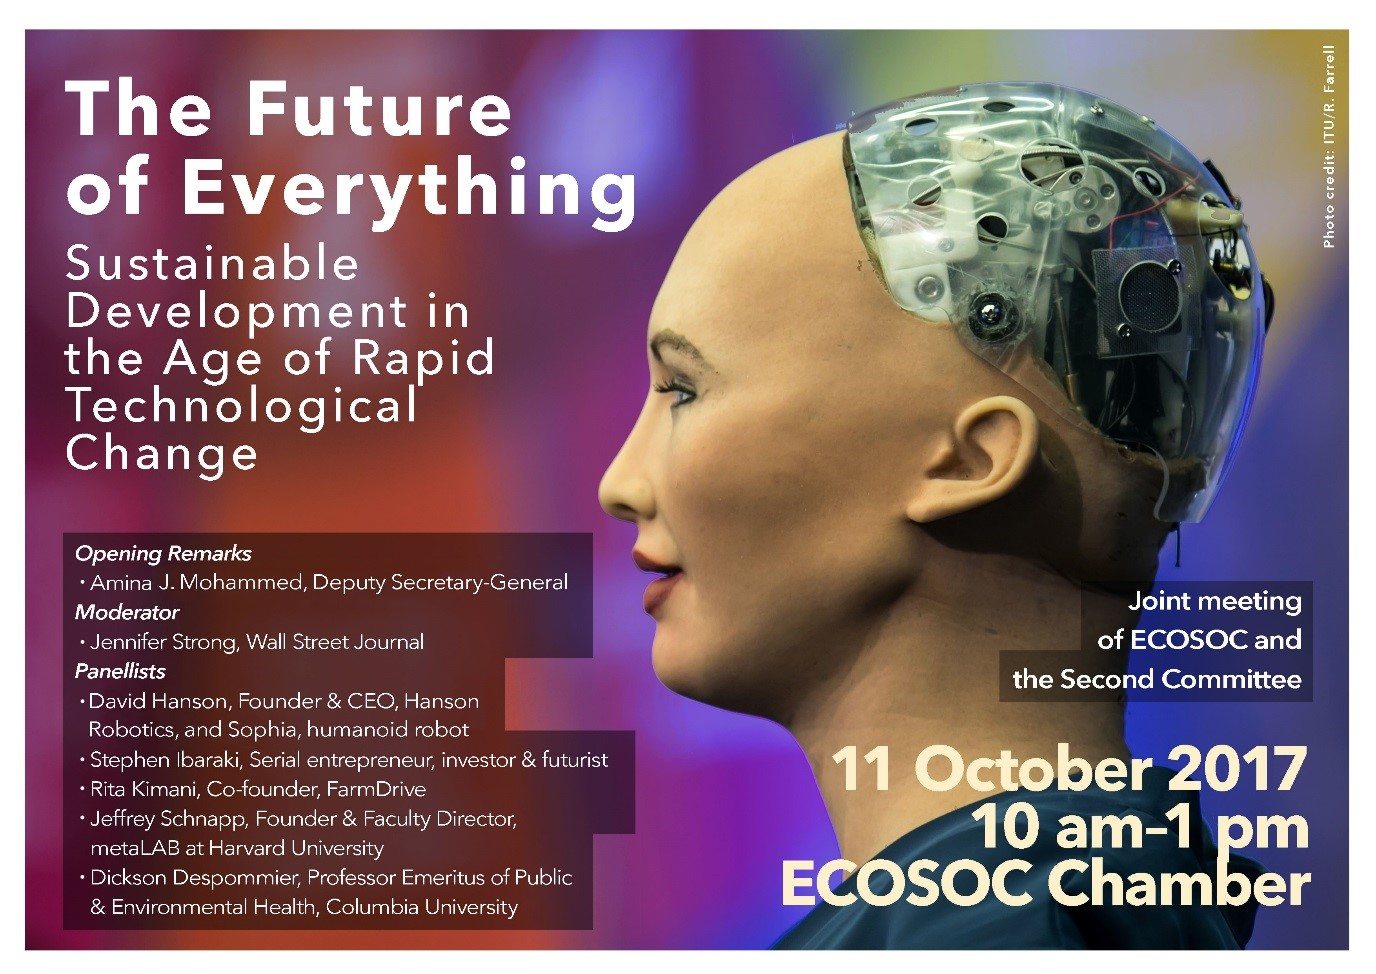 Looking to future, UN to consider how artificial intelligence could help achieve and reduce inequalities - United Sustainable Development